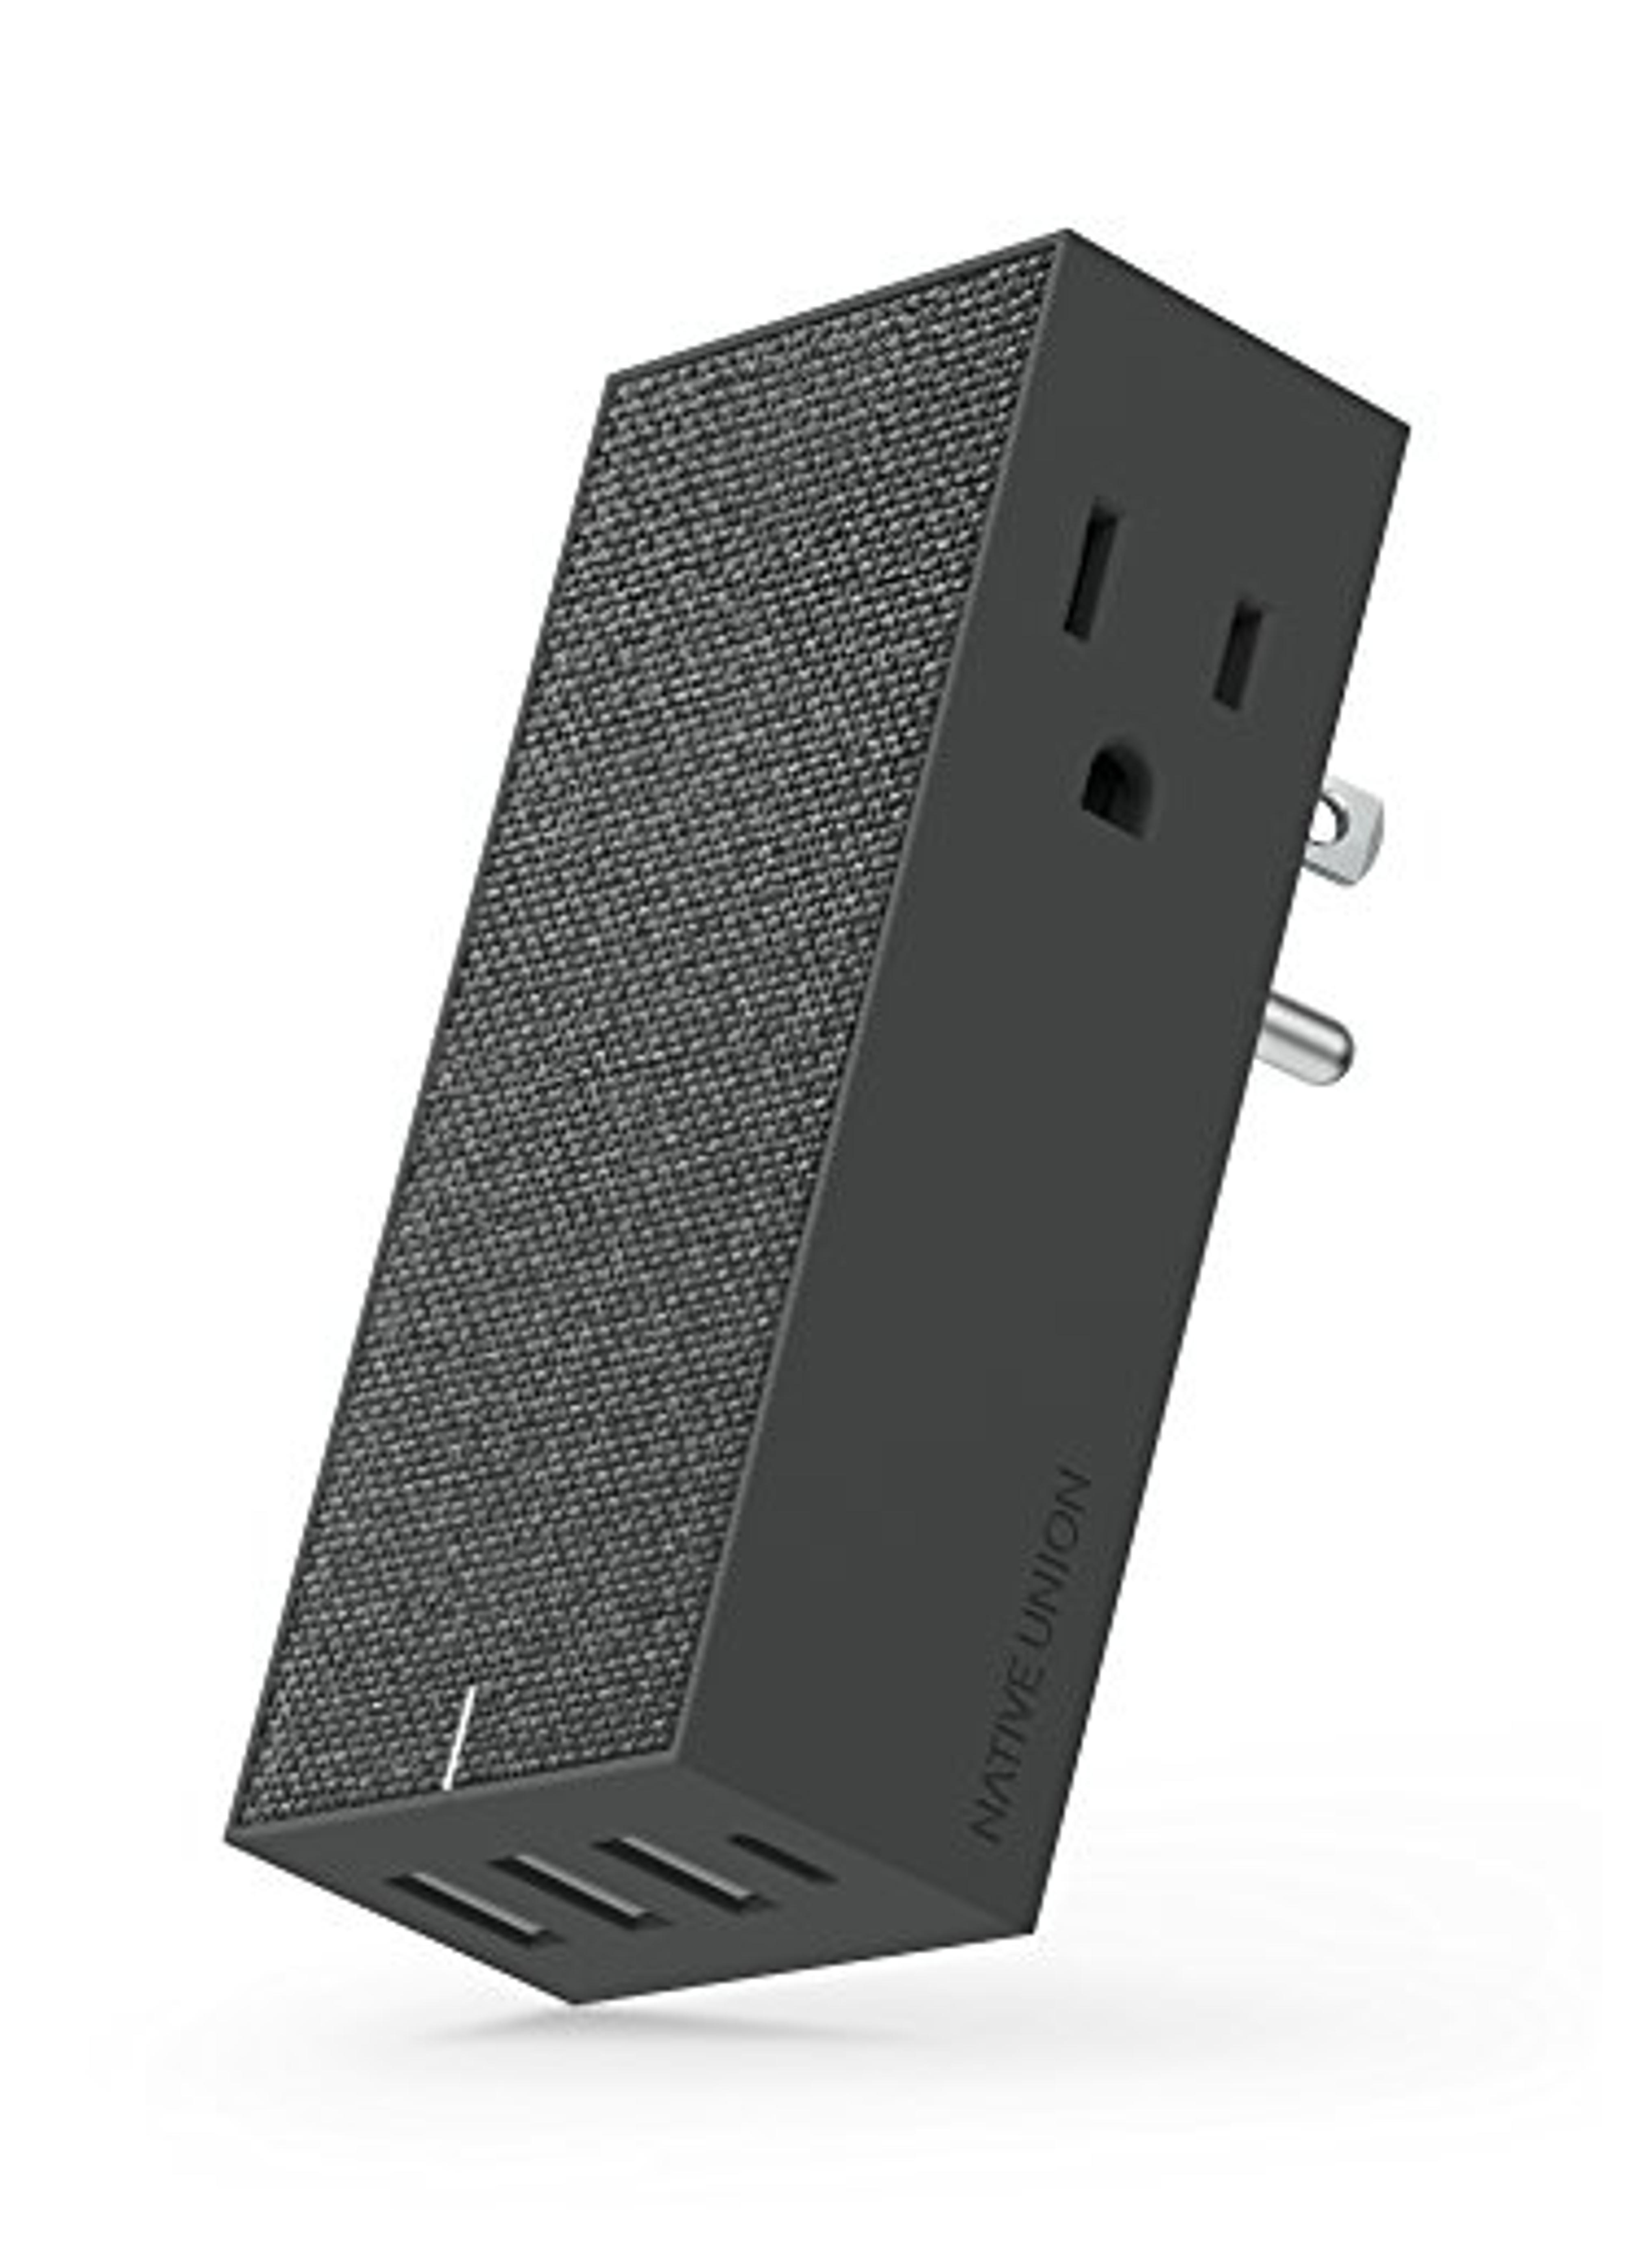 Native Union Smart HUB - 4-Port USB Wall Charger (Including One USB-C Port) with 2 x AC Outlets - Quick Charging for iPhone, iPad, Smartphones and Tablets (Slate)